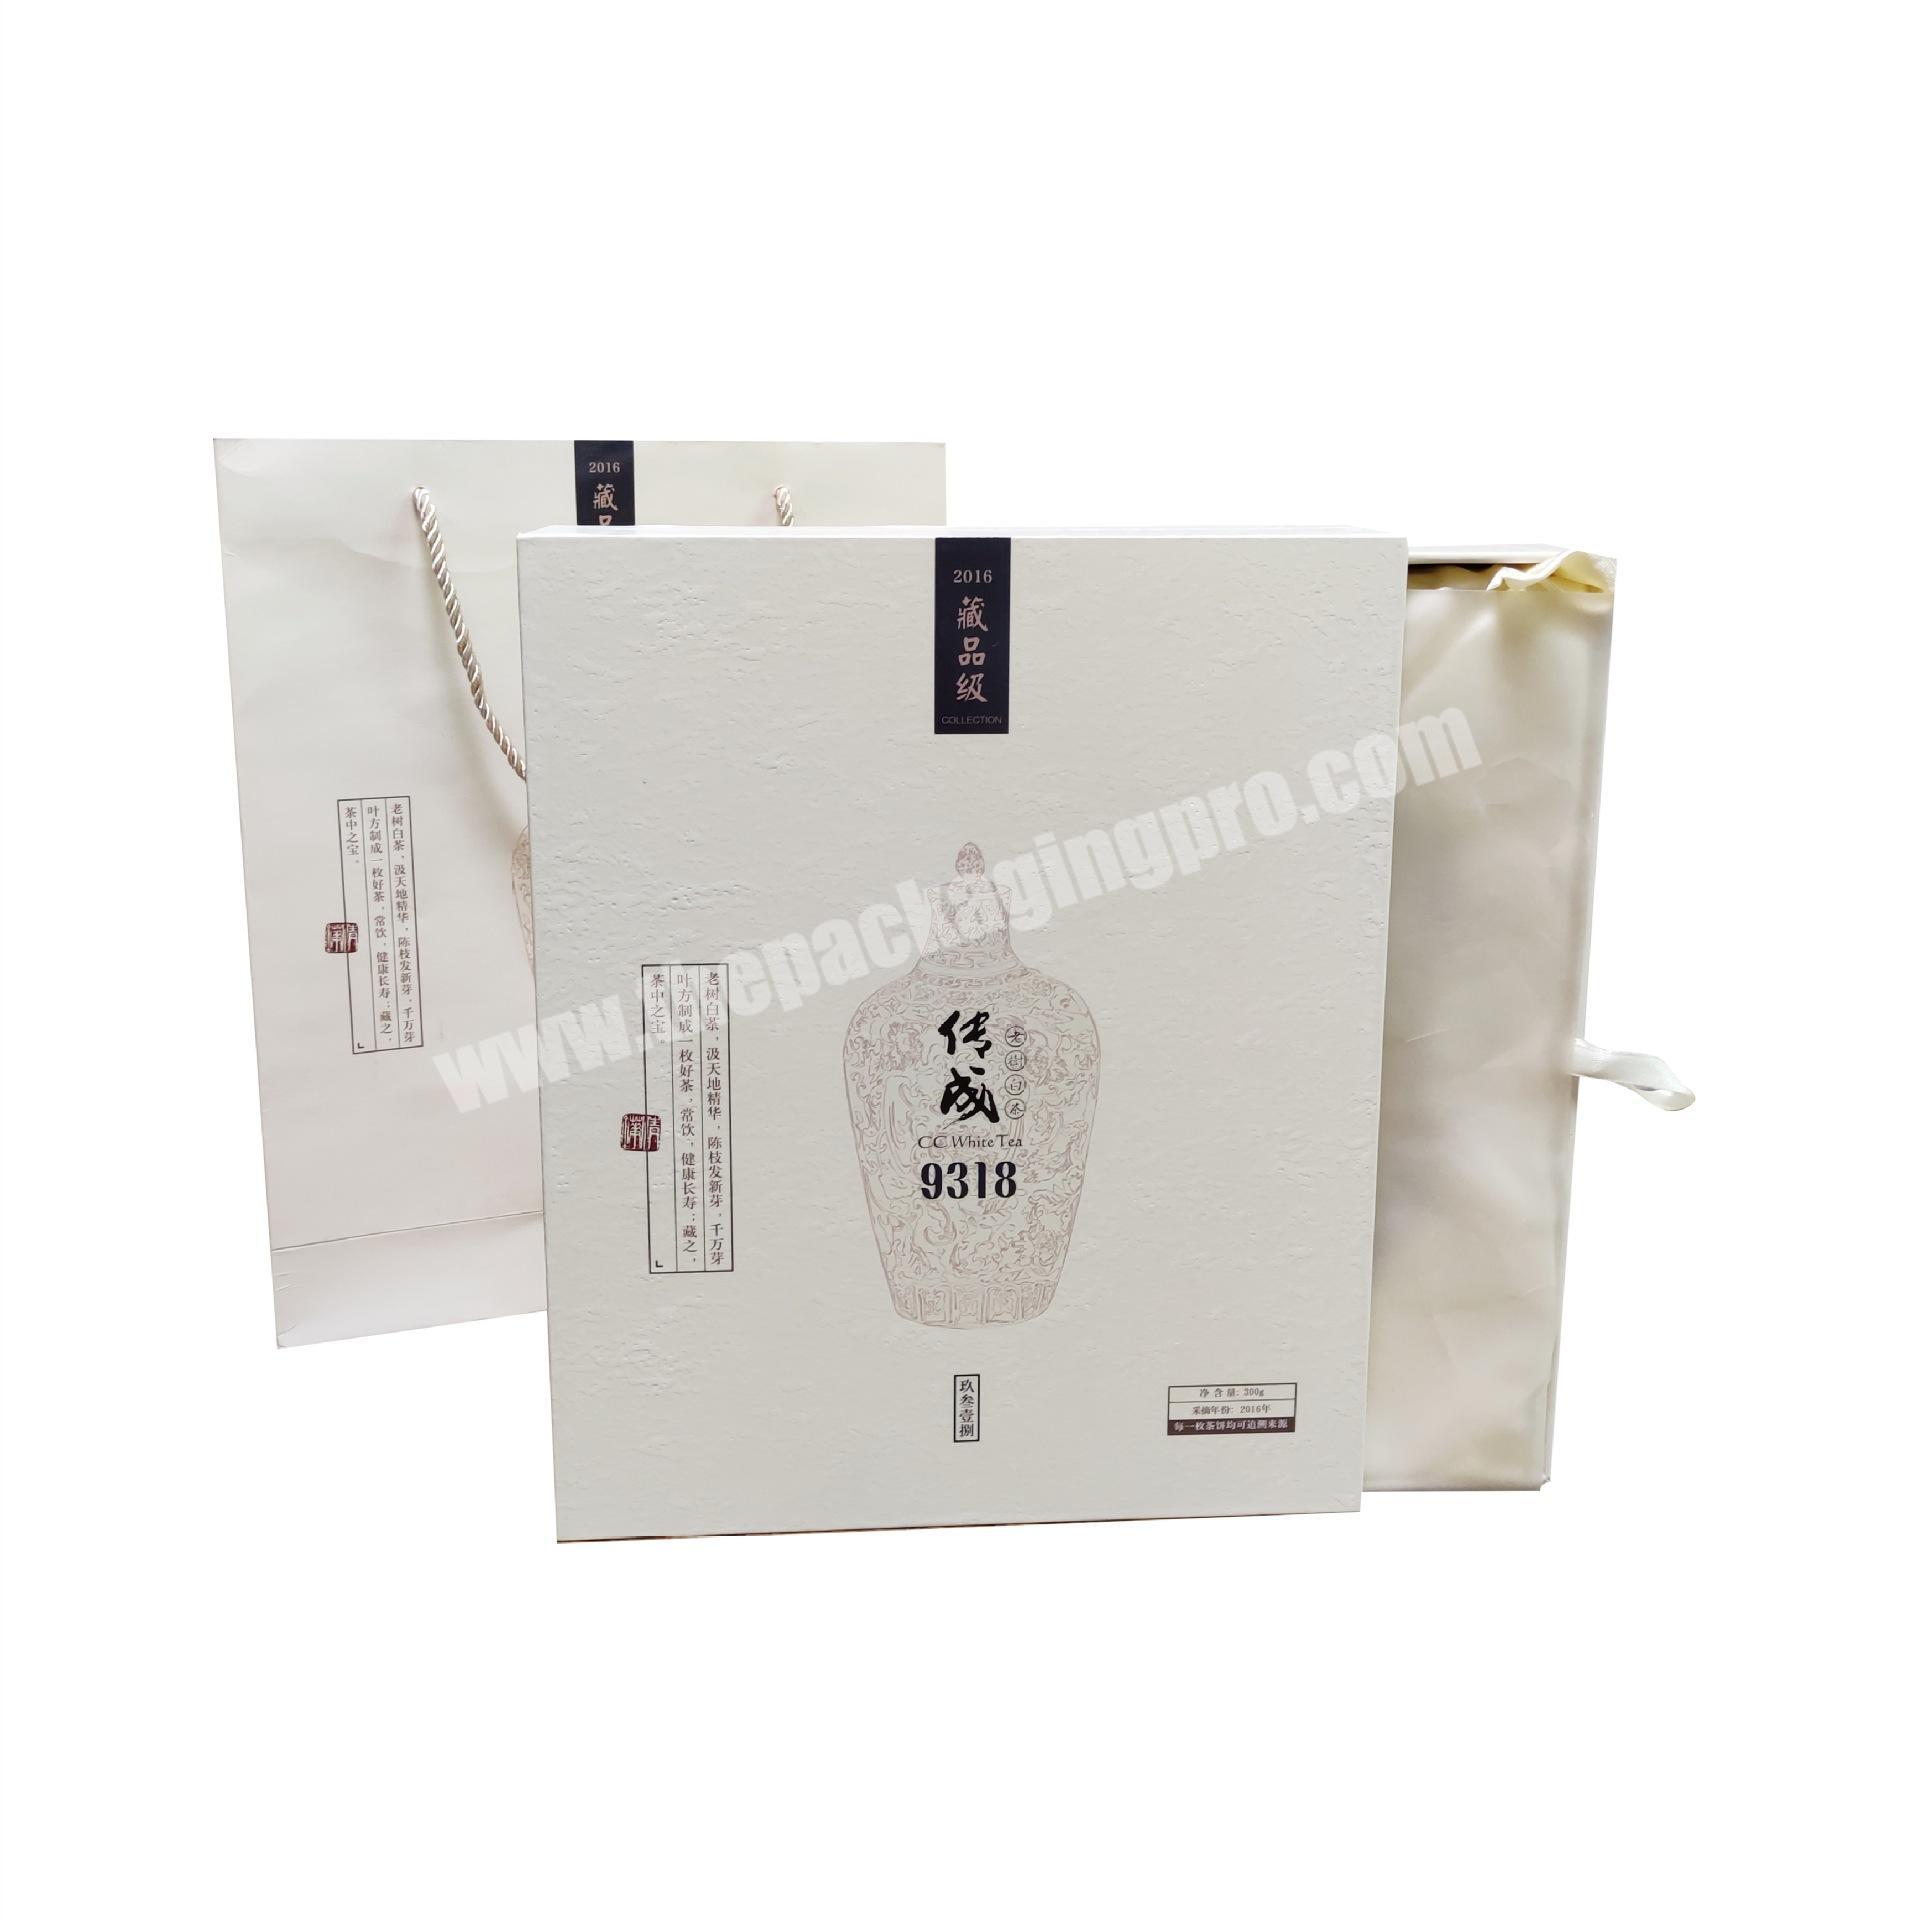 Factory direct tea box packaging is used to show the high quality of tea boxes